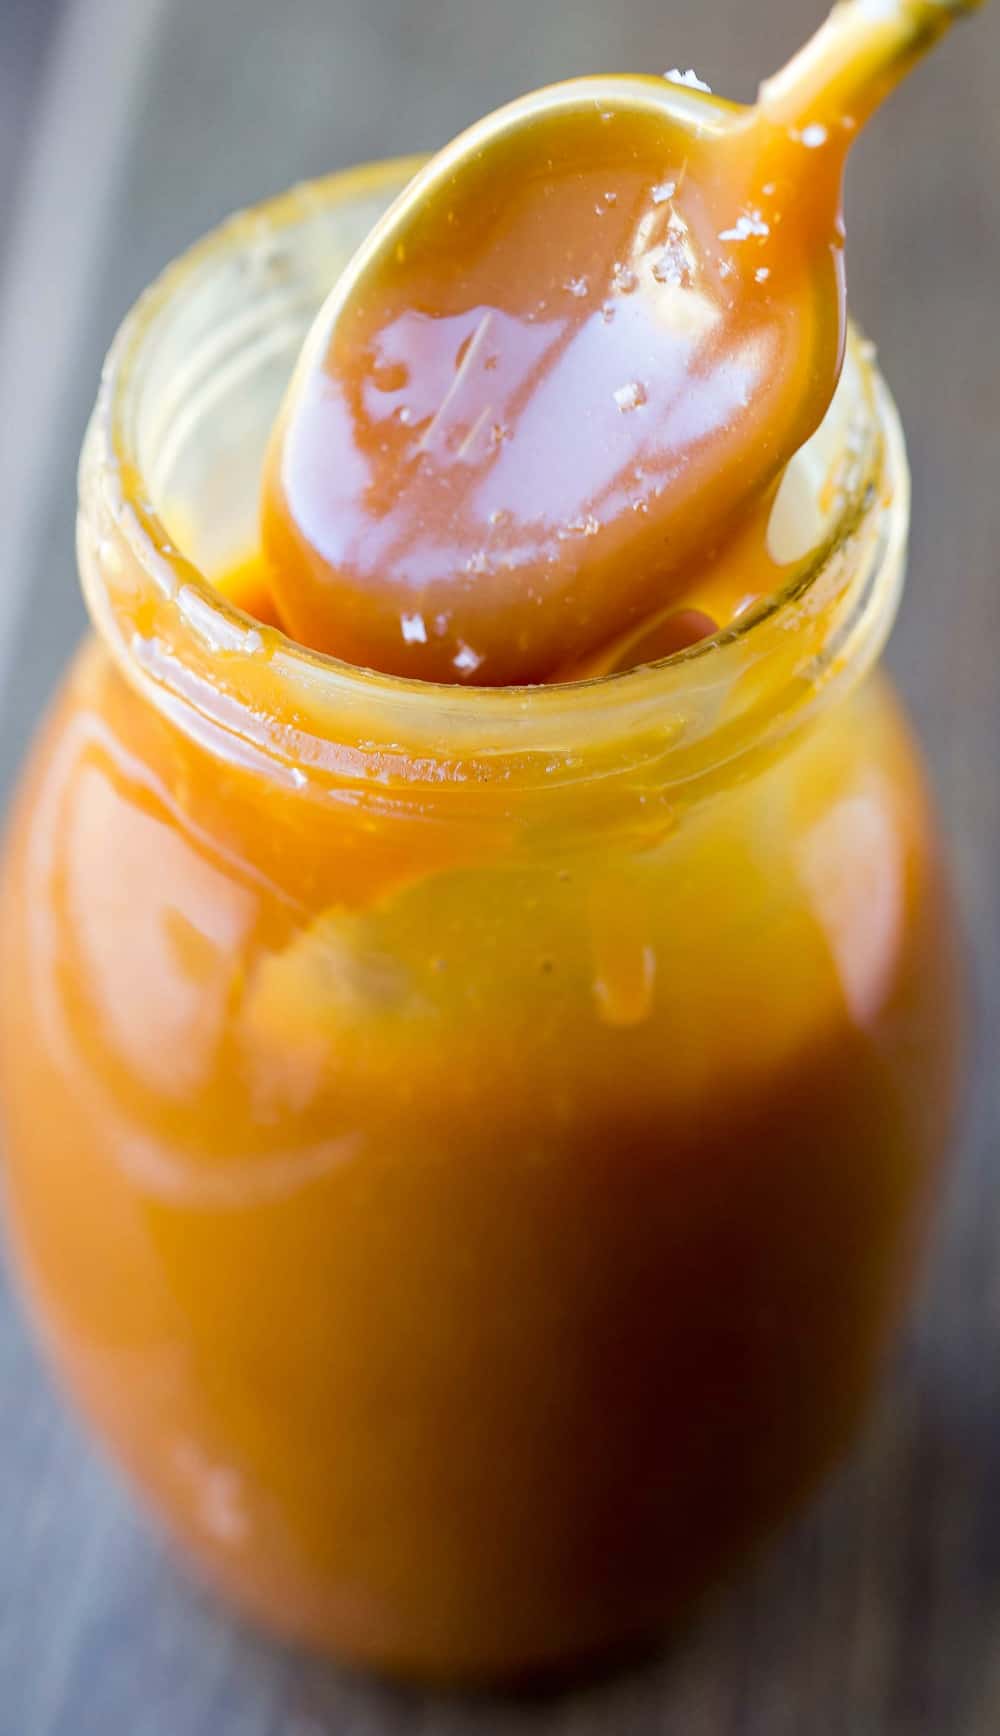 Spoon dipping up Salted Caramel Sauce